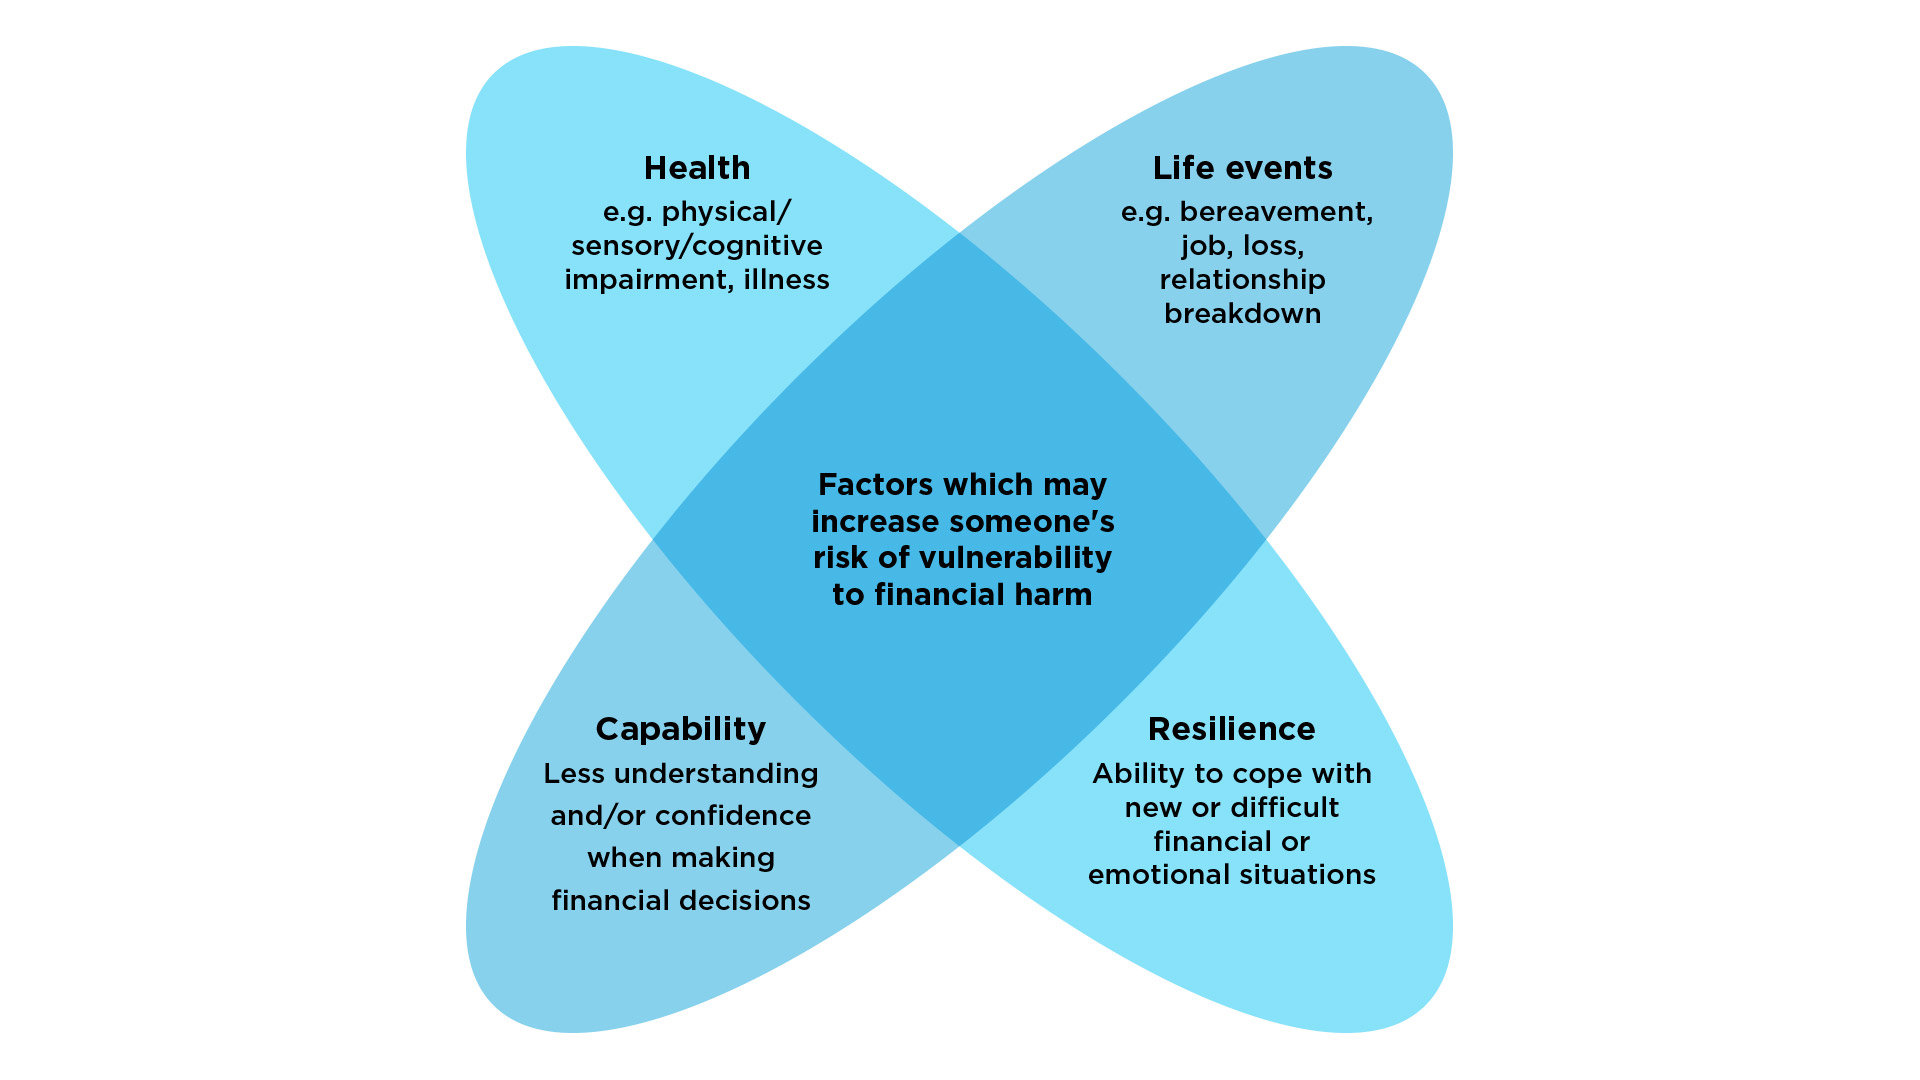 A diagram illustrating the four drivers of vulnerability. They are: 1. Health, e.g. physical/sensory/cognitive impairment or illness; 2. Life Events, e.g. bereavement, job loss or relationship breakdown; 3. Capability, less understanding and/or confidence when making financial decisions; 4. Resilience, ability to cope with new or difficult financial or emotional situations. The quality that describes them all: Factors which may increase someone’s risk of vulnerability to financial harm.